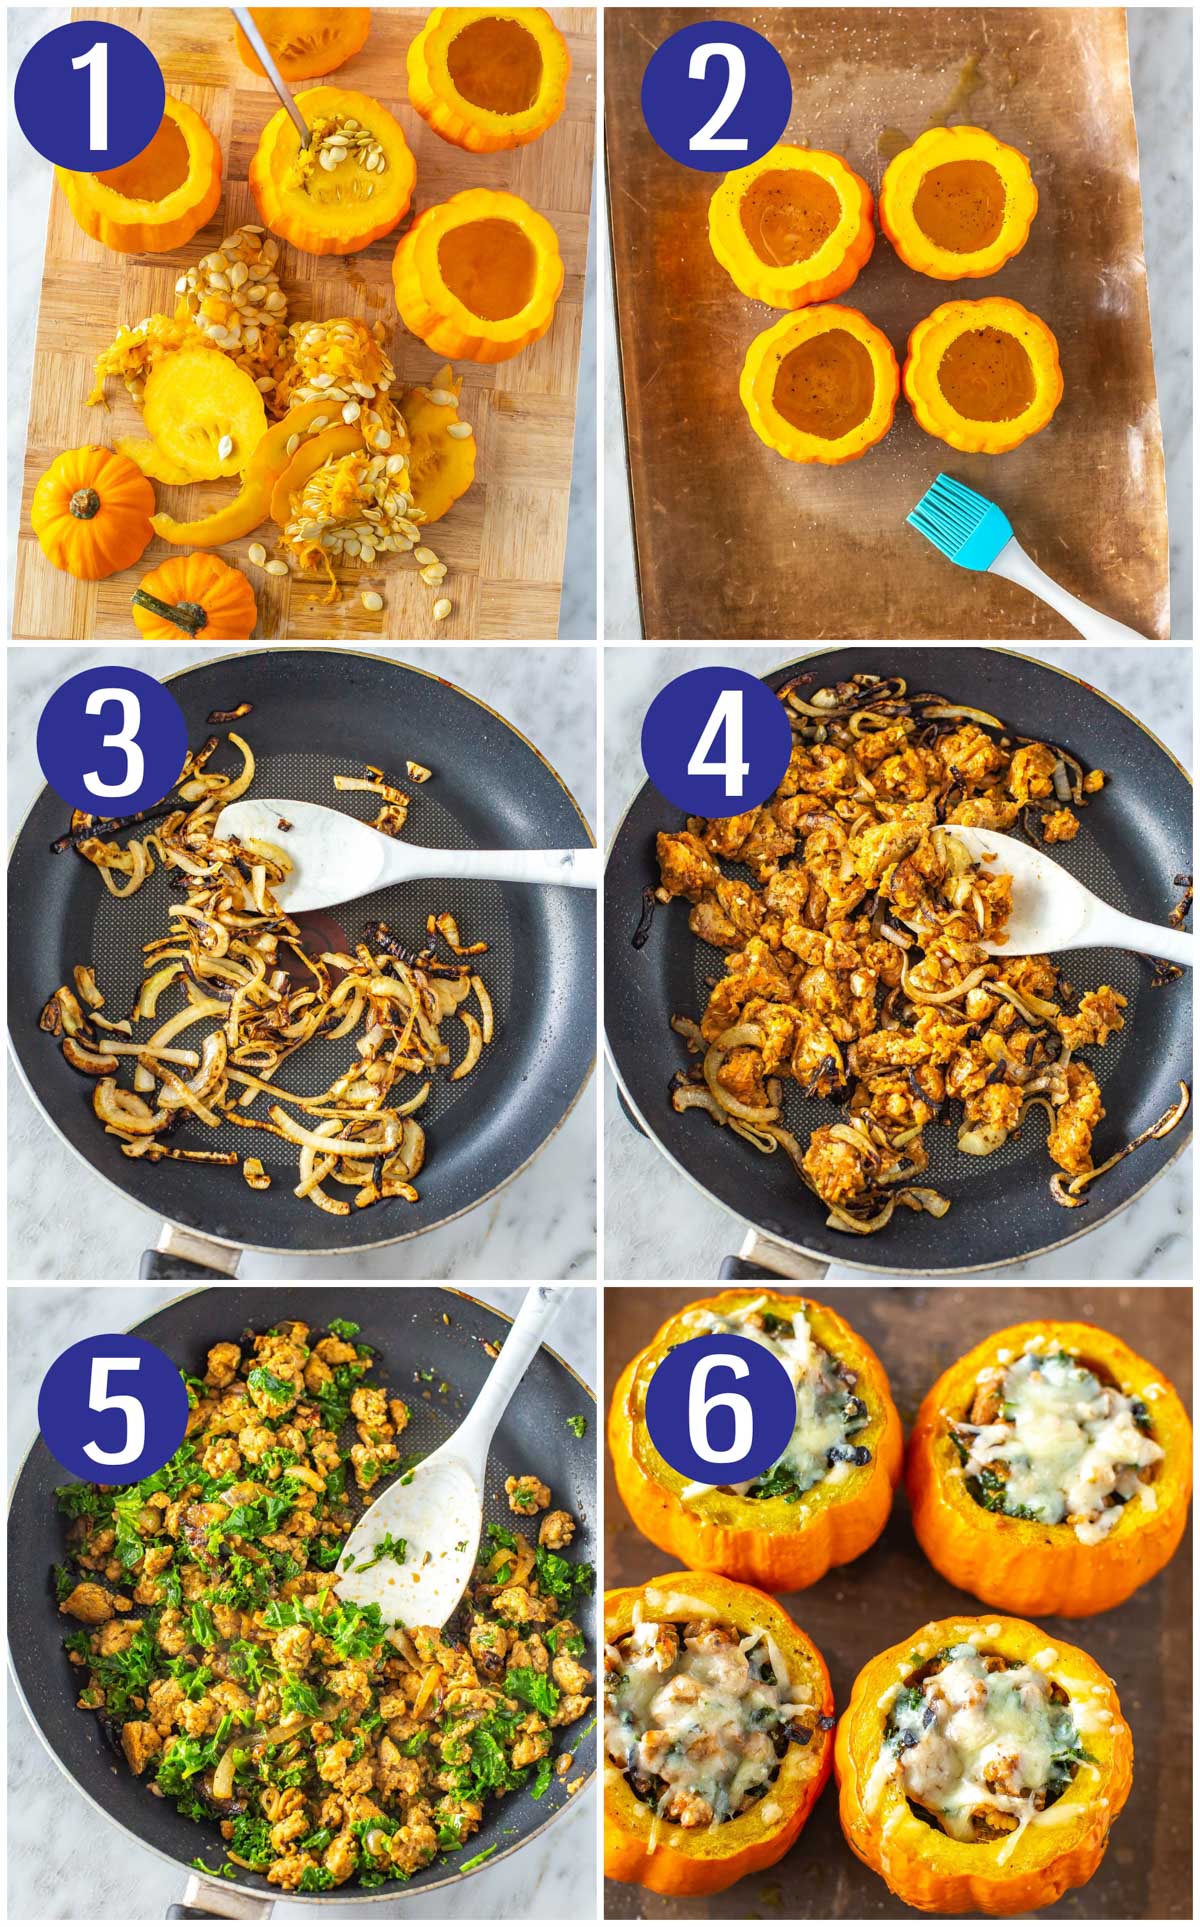 Step-by-step instructions collage for making stuffed pumpkins: remove seeds from pumpkins, brush with olive oil and bake, saute onions, saute sausage, saute kale, fill pumpkins with filling and top with gruyere cheese before baking.